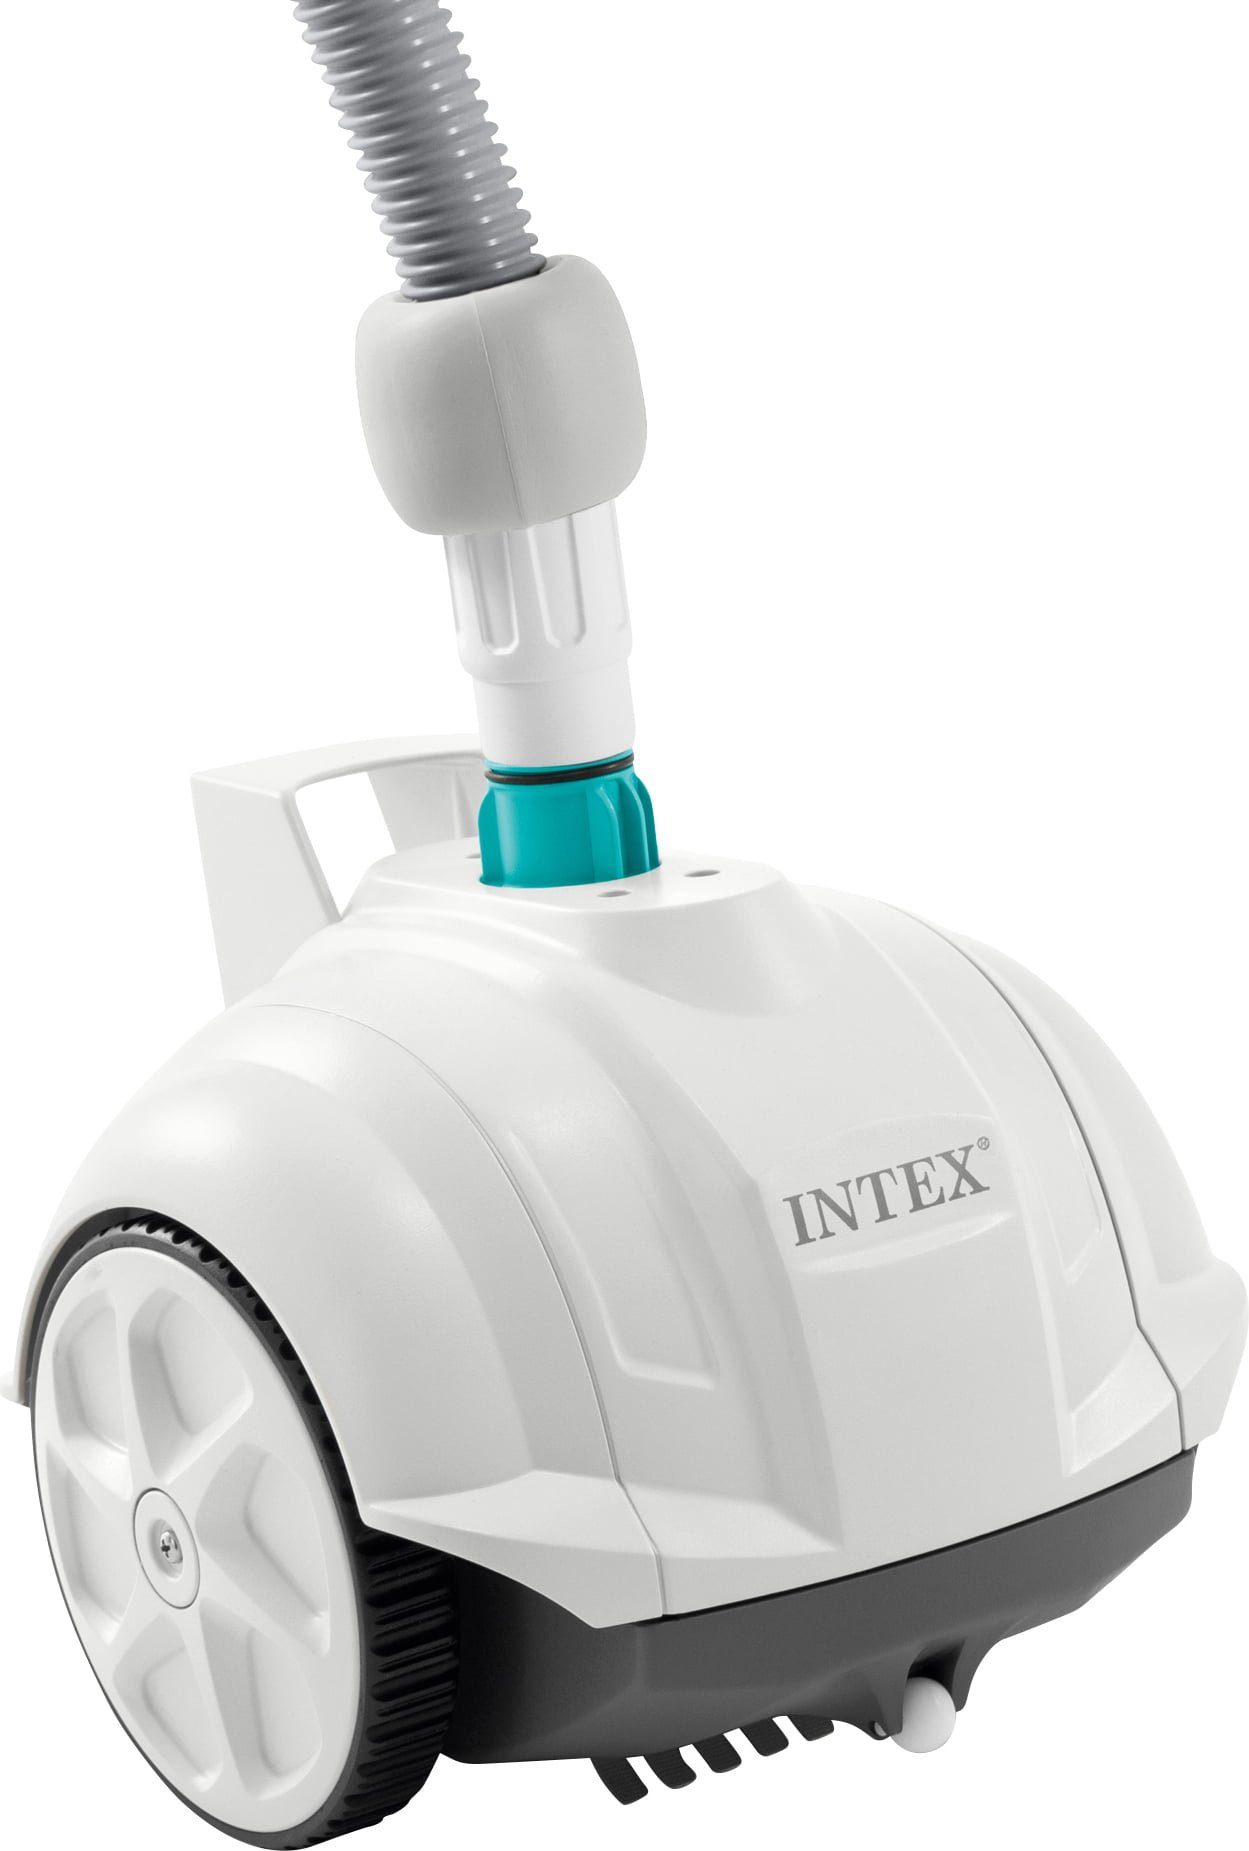 Intex Poolroboter Auto Pool Cleaner ZX50